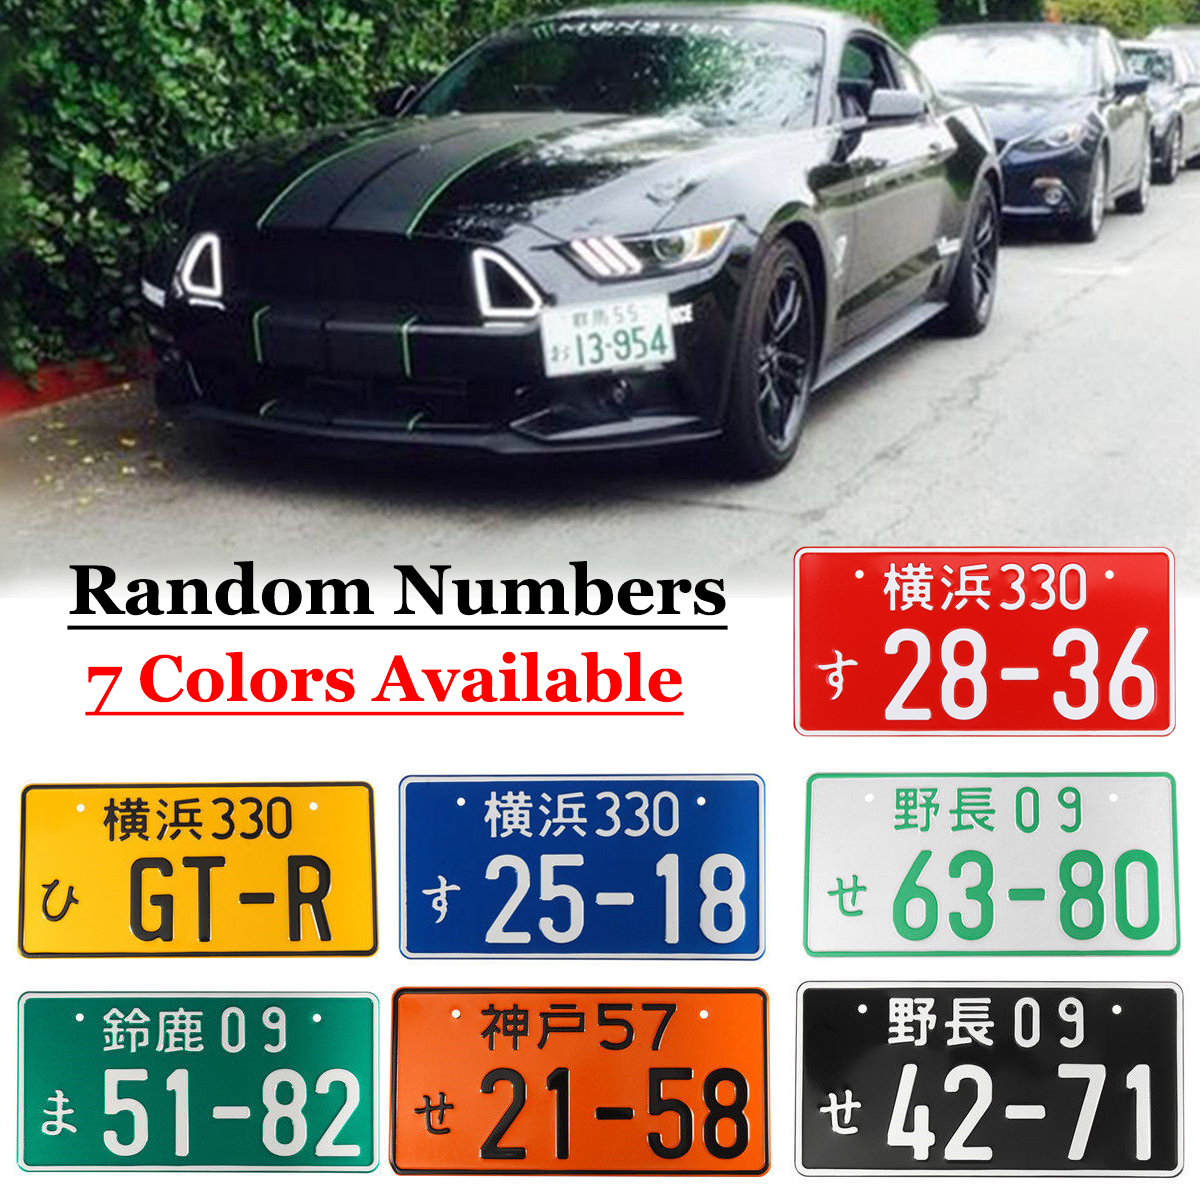 Yellow JenNiFer Universal Multiple Color Car Numbers Japanese Decorations License Plate Aluminum Tag For Jdm Kdm Racing Car Motorcycle